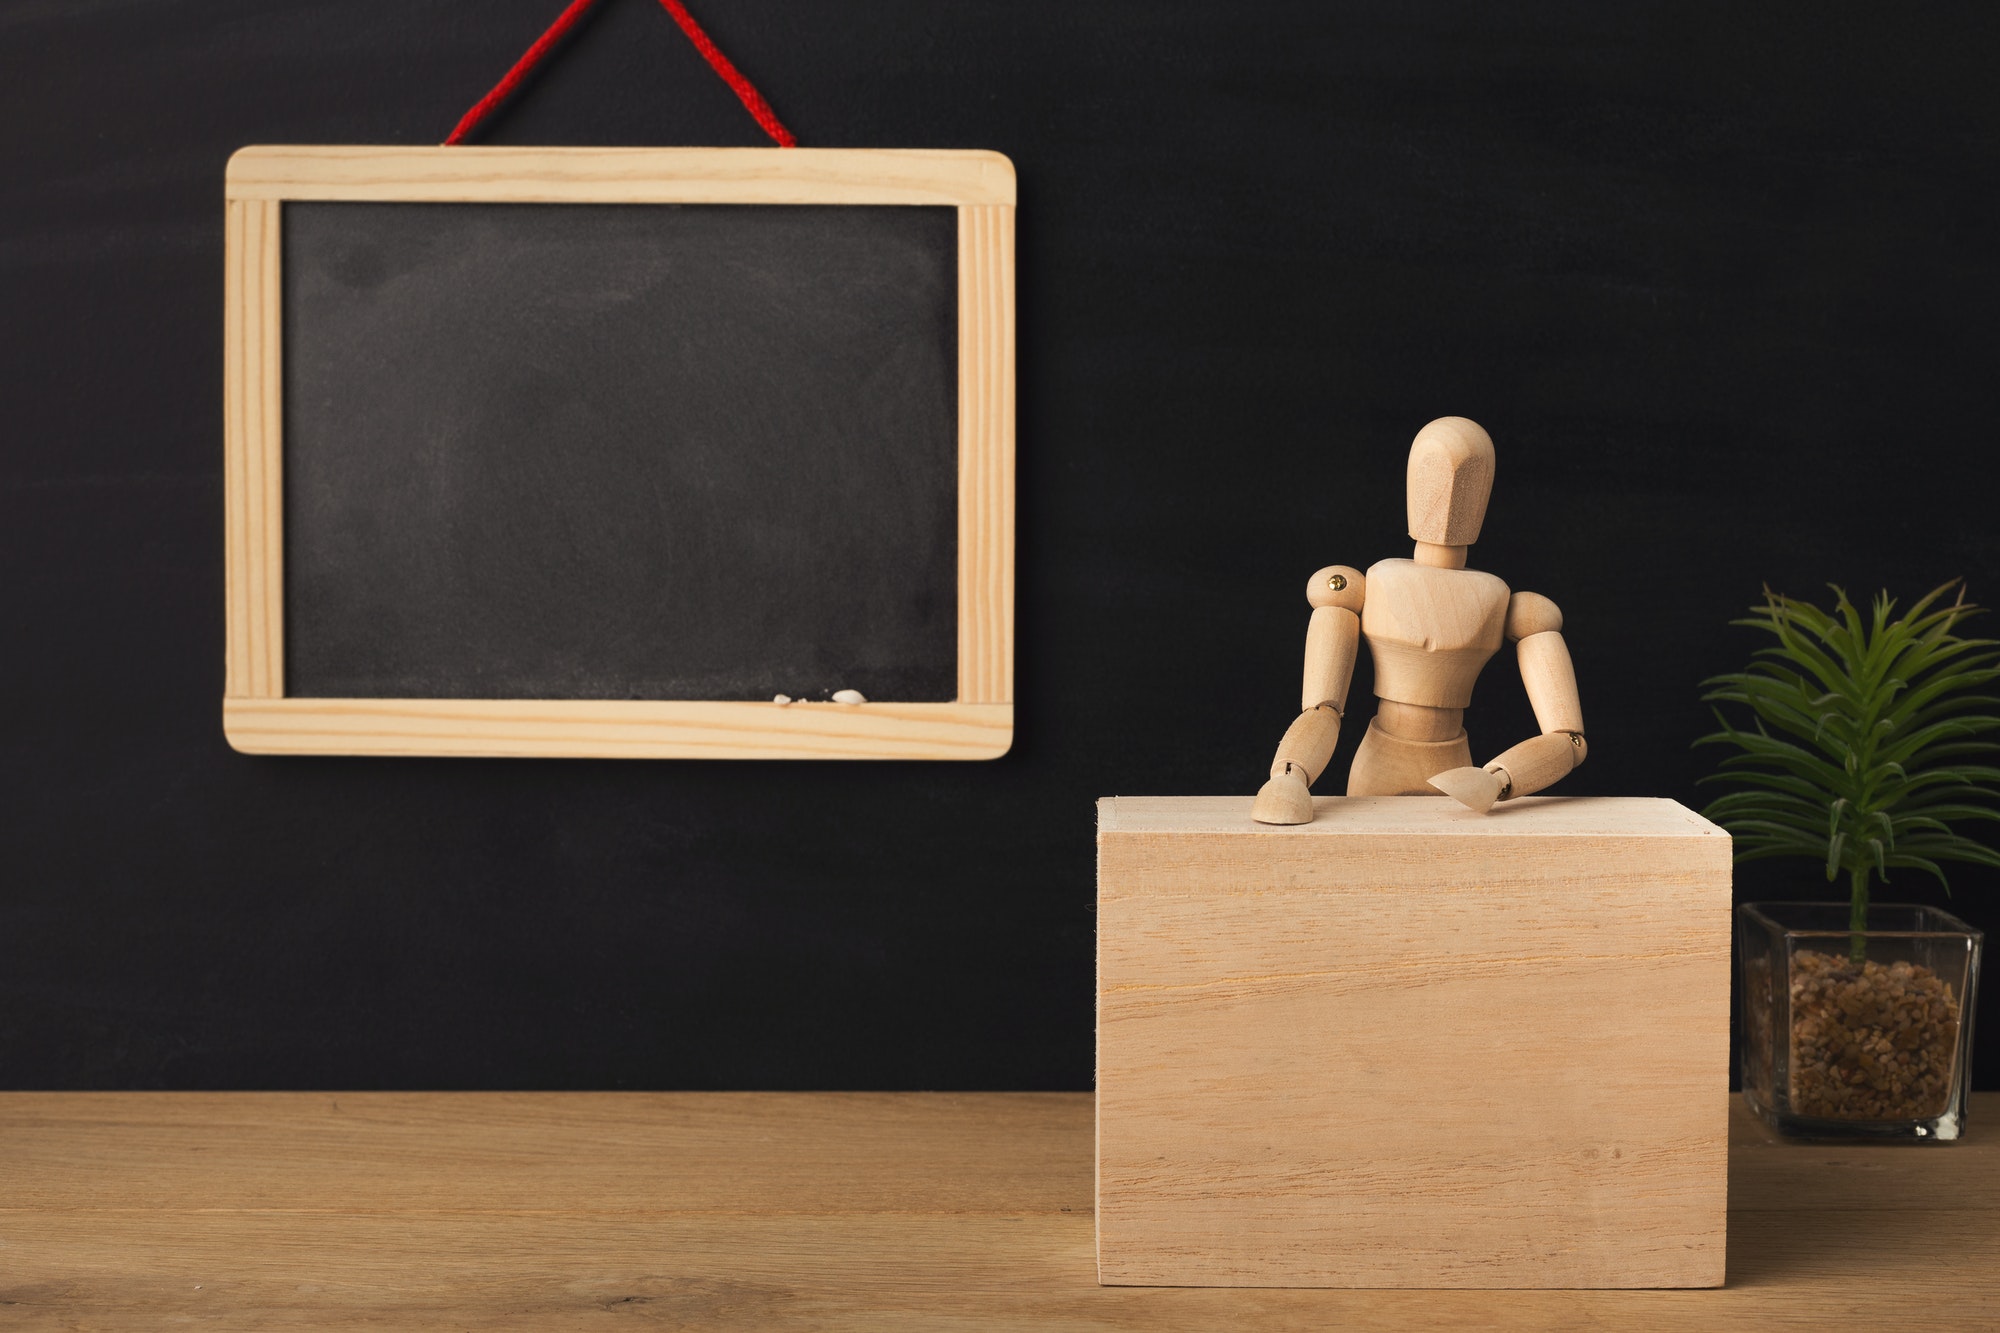 Wooden marionette sitting in classroom